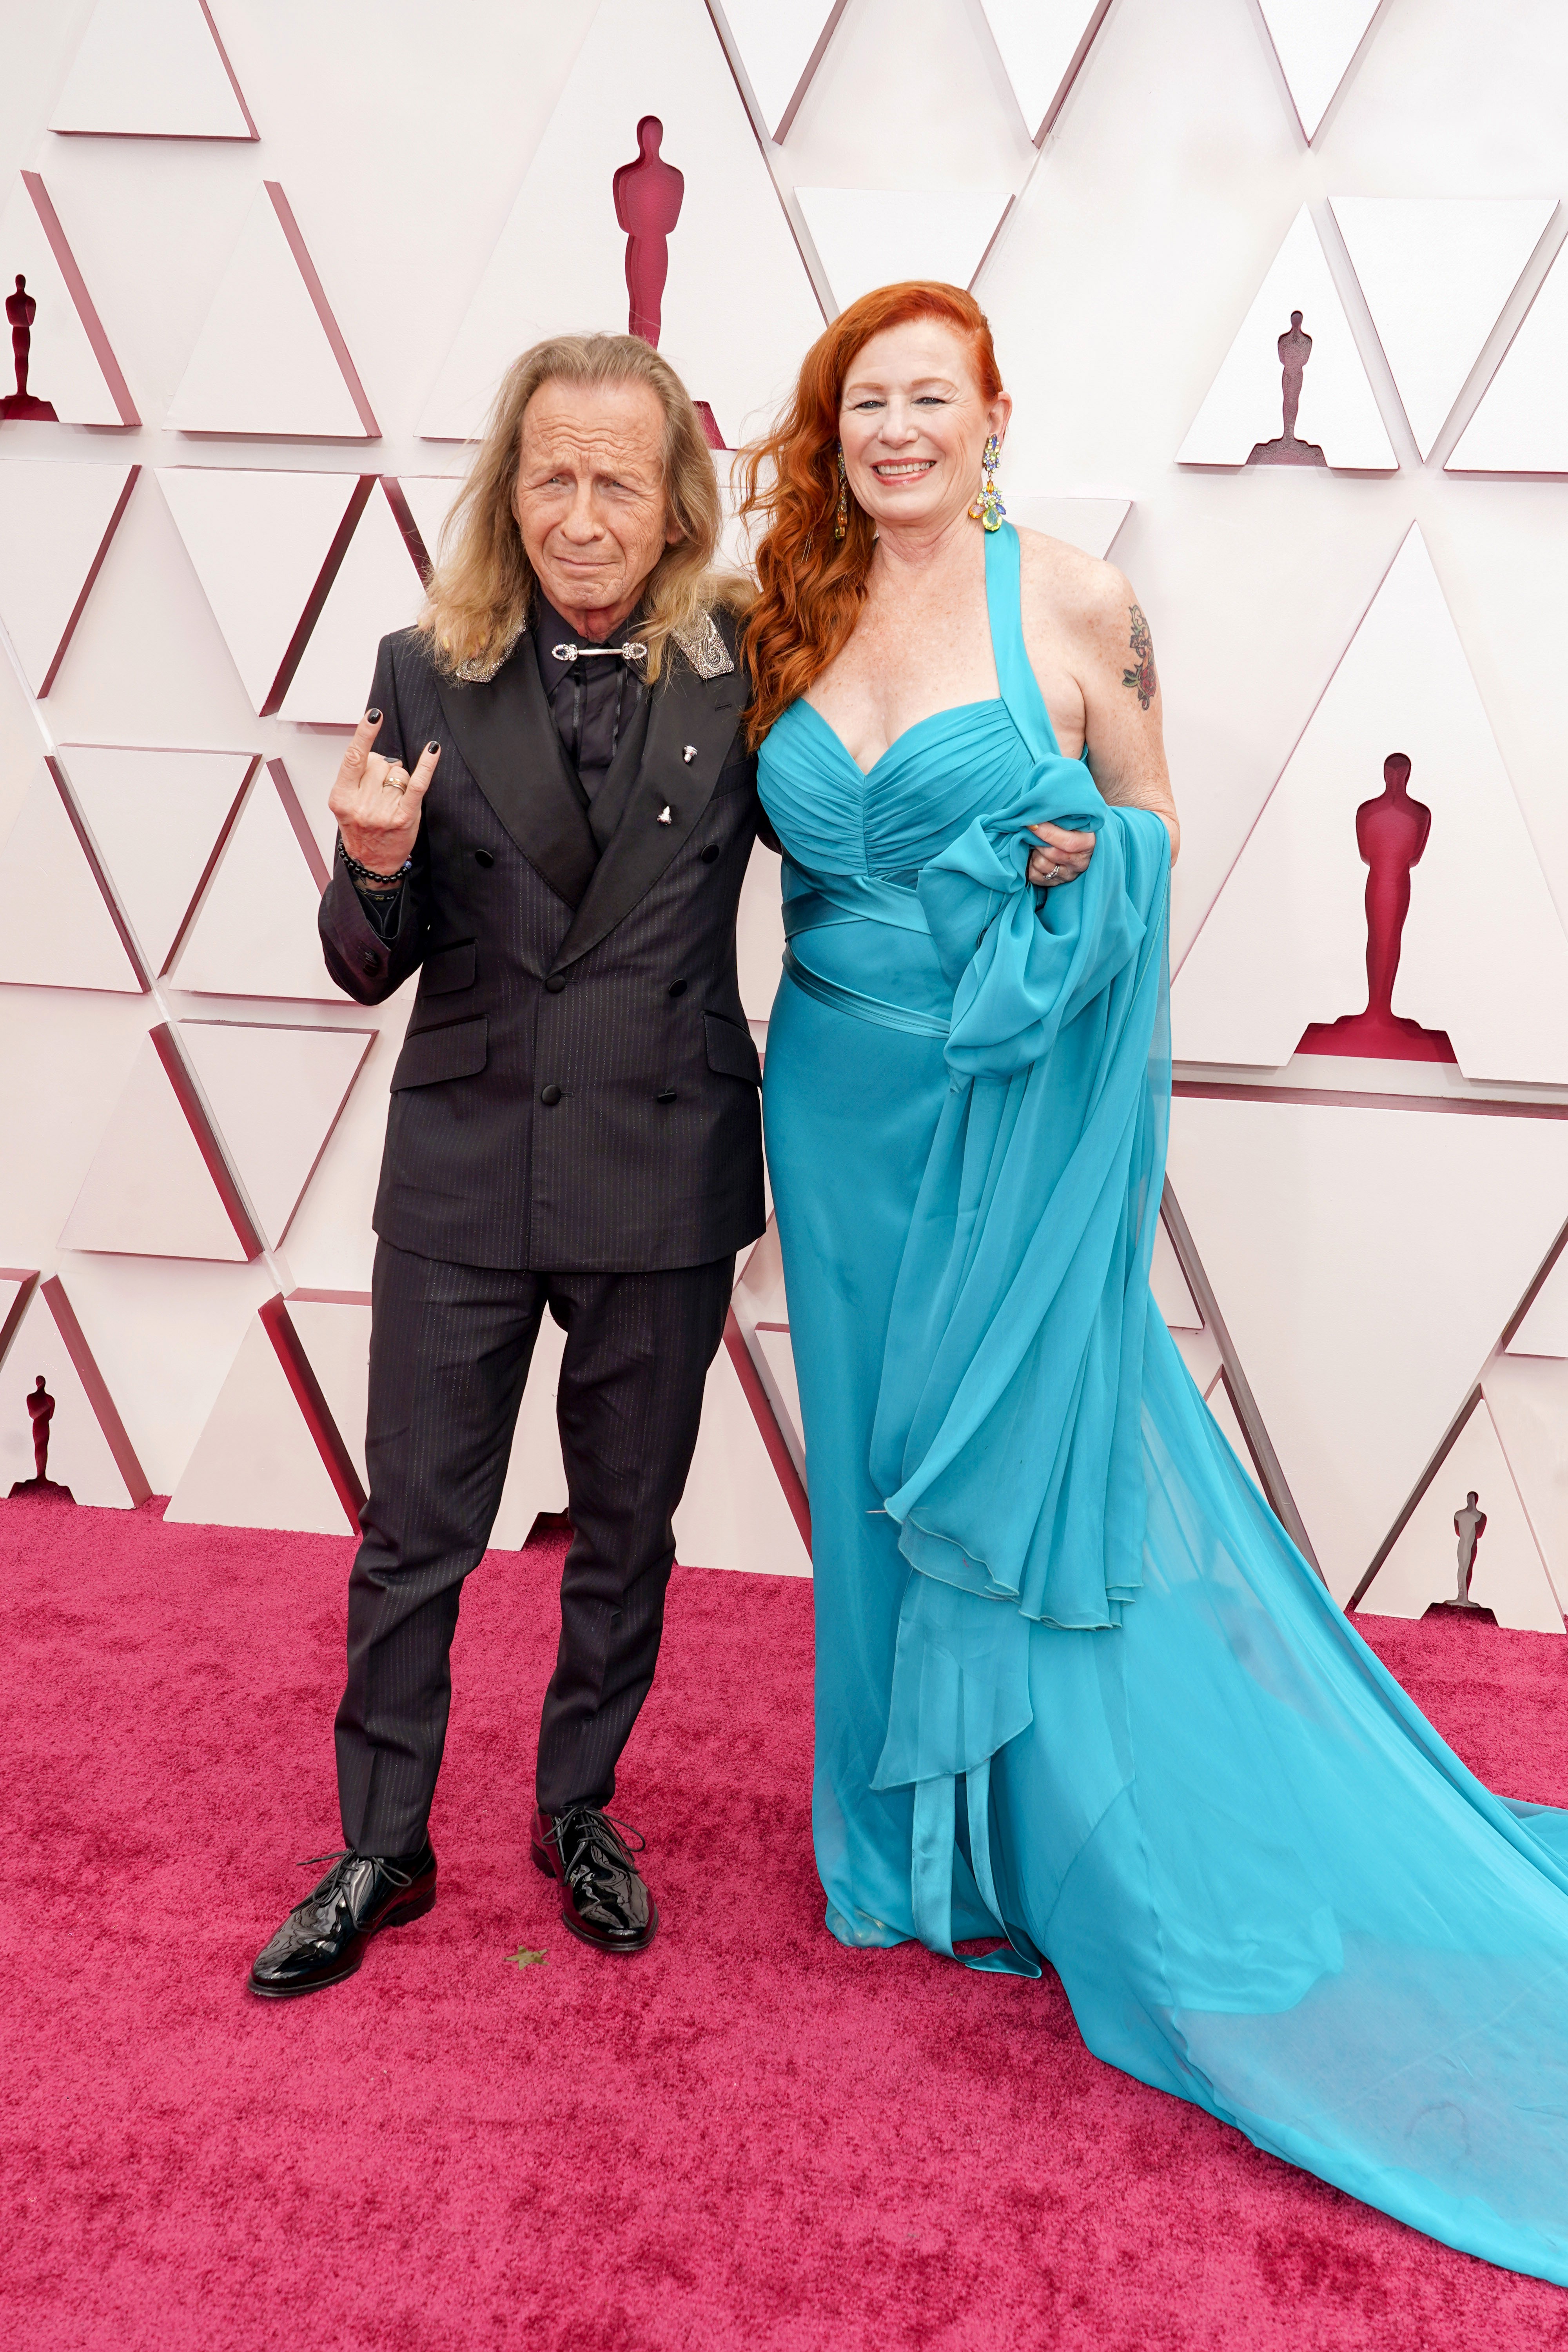 LOS ANGELES, CALIFORNIA – APRIL 25: (L-R) Paul Raci and Liz Hanley Raci attend the 93rd Annual Academy Awards at Union Station on April 25, 2021 in Los Angeles, California. (Photo by Chris Pizzelo-Pool/Getty Images) (Foto: Getty Images)